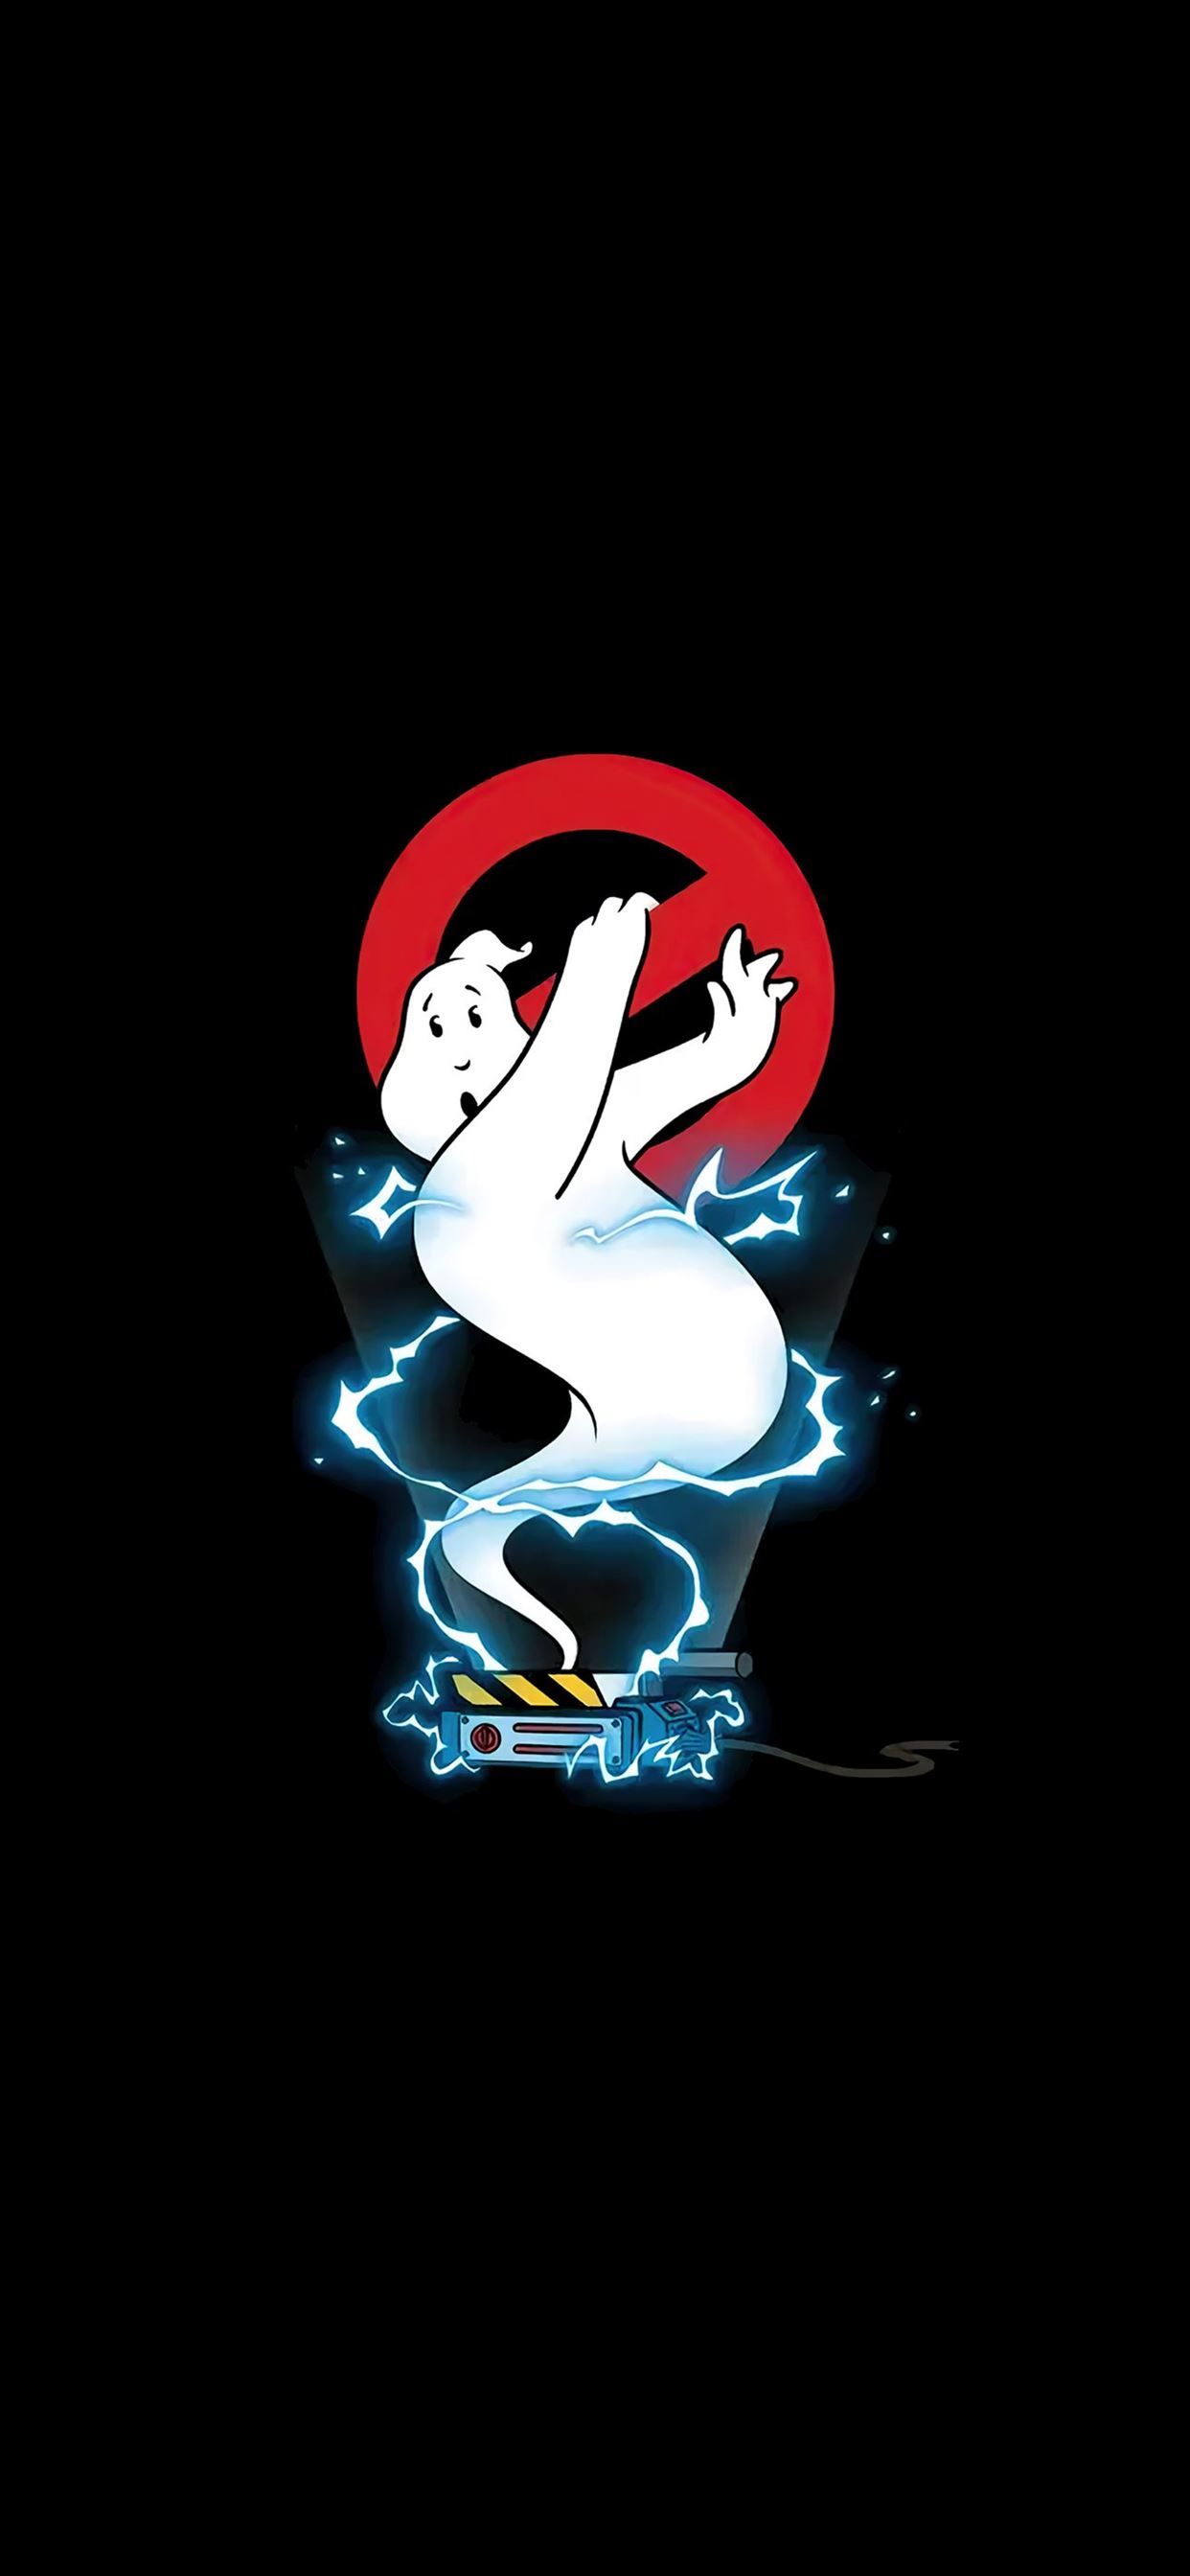 Ghost band logo wallpaper by Ryan15bread - Download on ZEDGE™ | 6c68